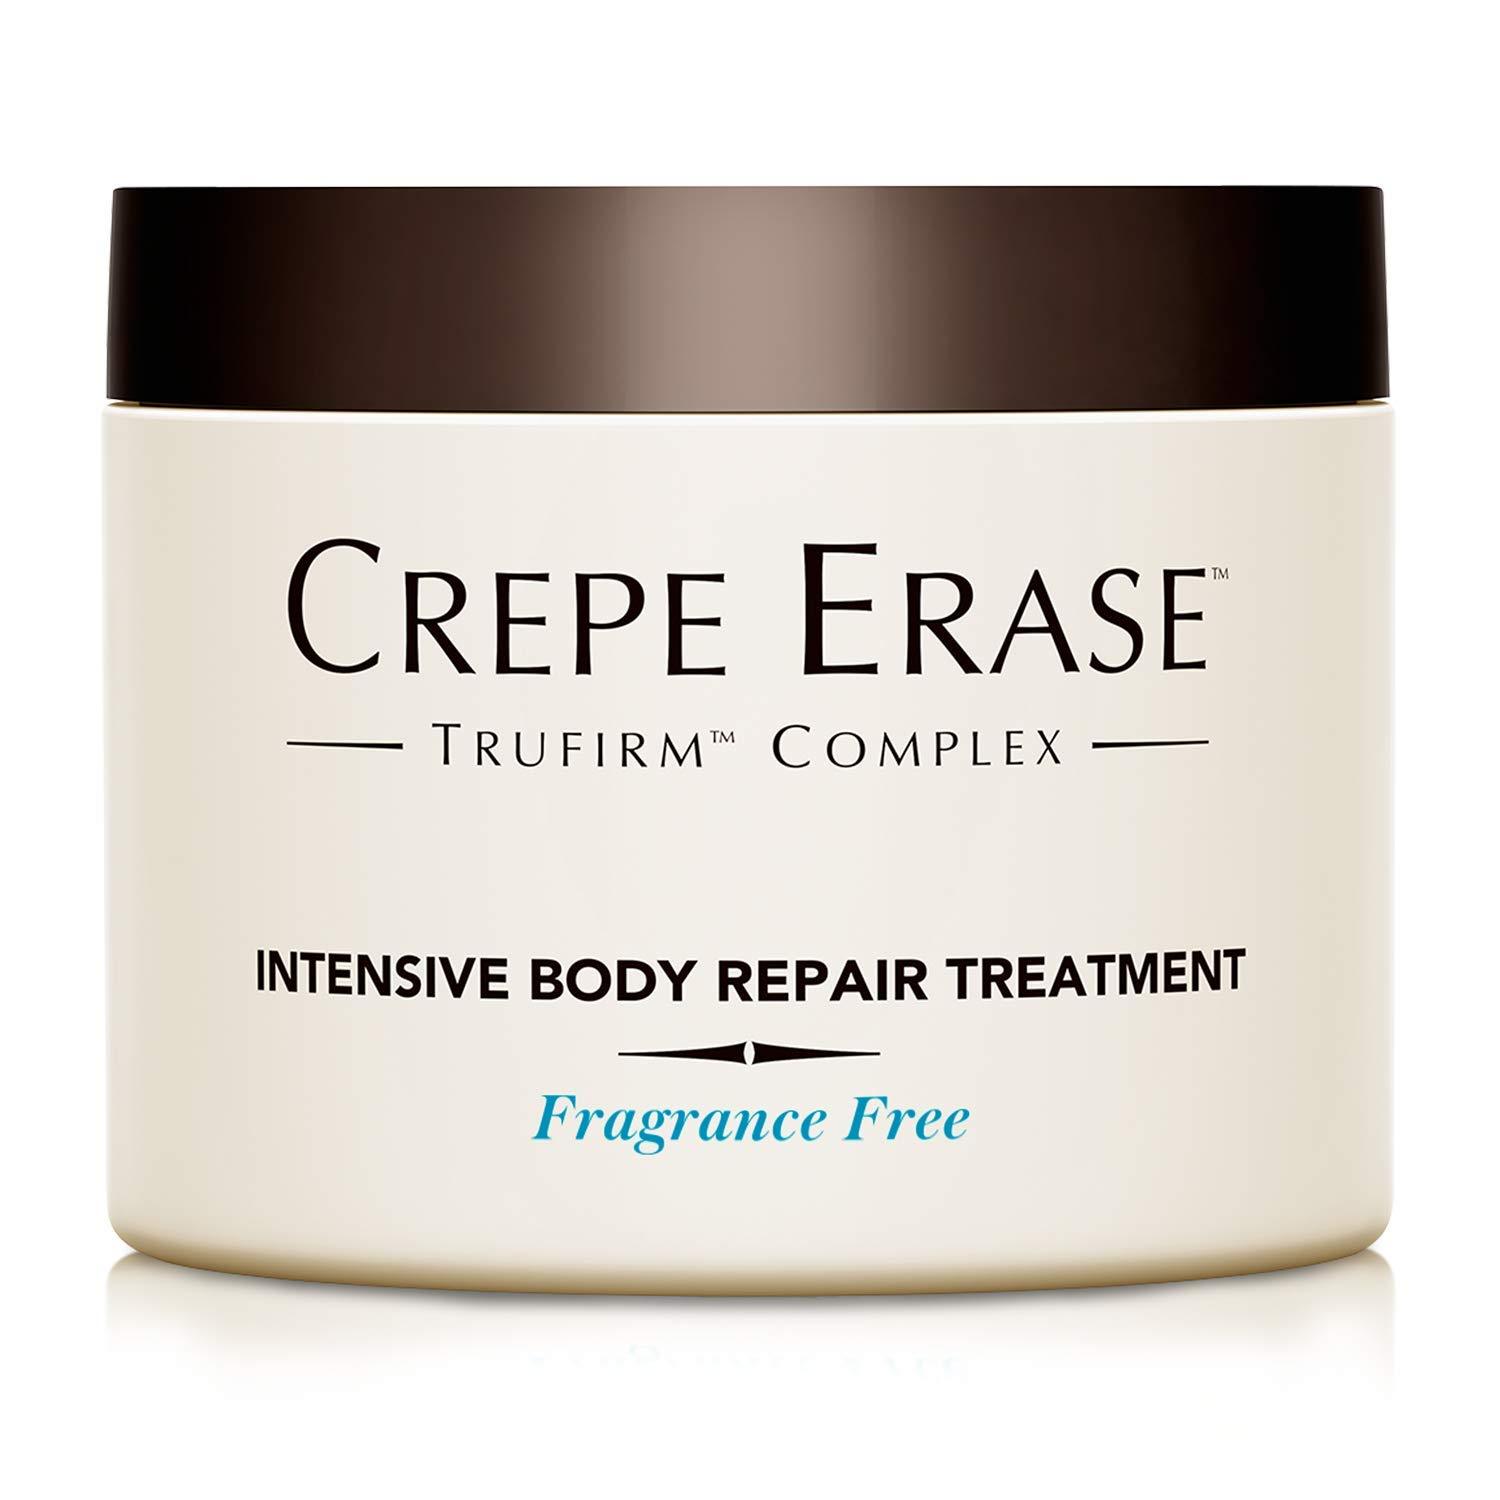 Crepe Erase – Intensive Body Repair Treatment – Fragrance Free 10 Ounce